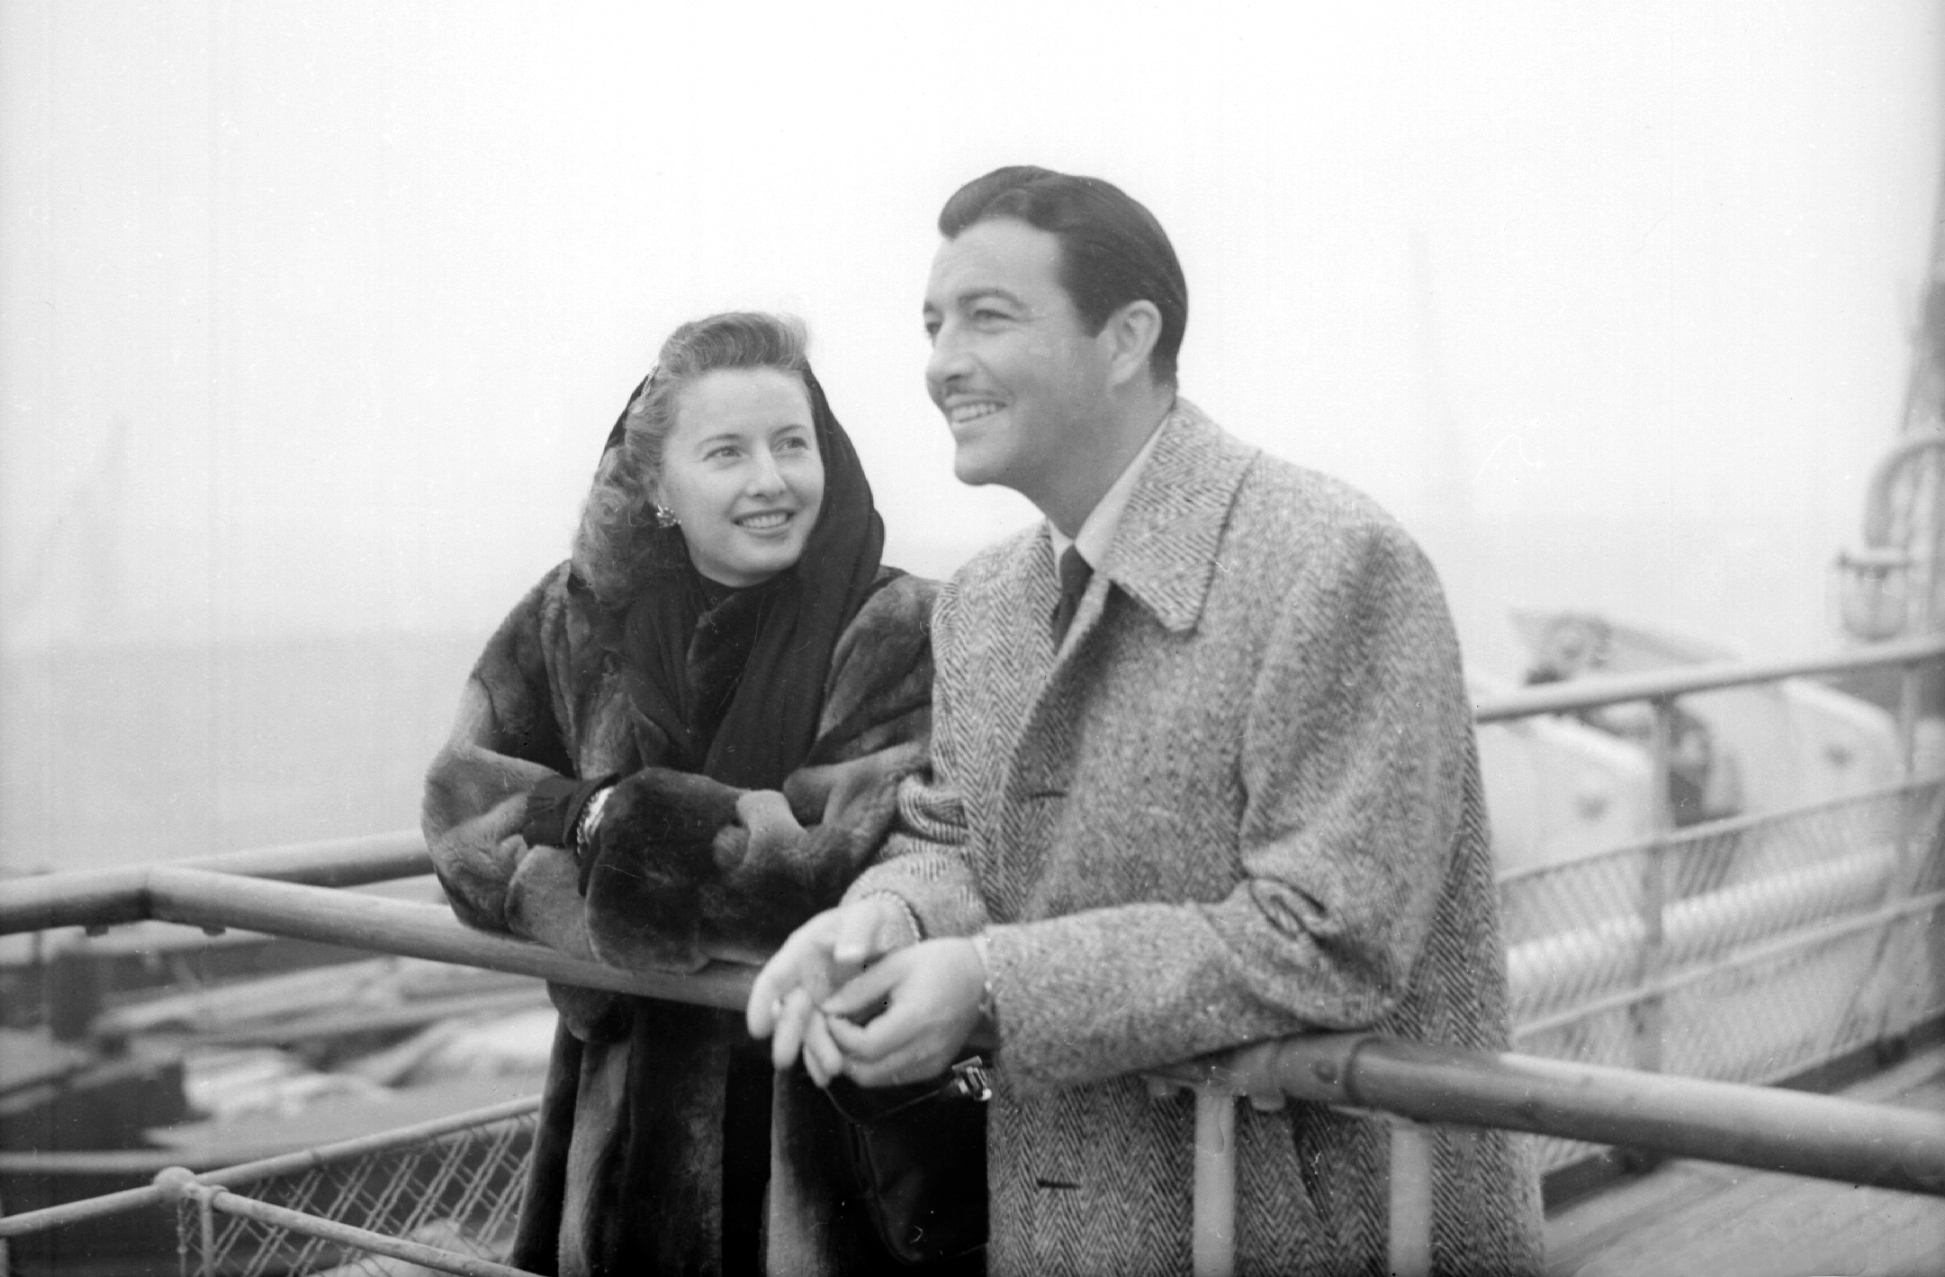 Robert Taylor and Barbara Stanwyck in Southampton on February 10, 1947. The American film and television star Robert Taylor was born in Filley, Nabraska on August 5, 2011 as Spangler Arlington Brugh. He starred in many films throughout the 30s,